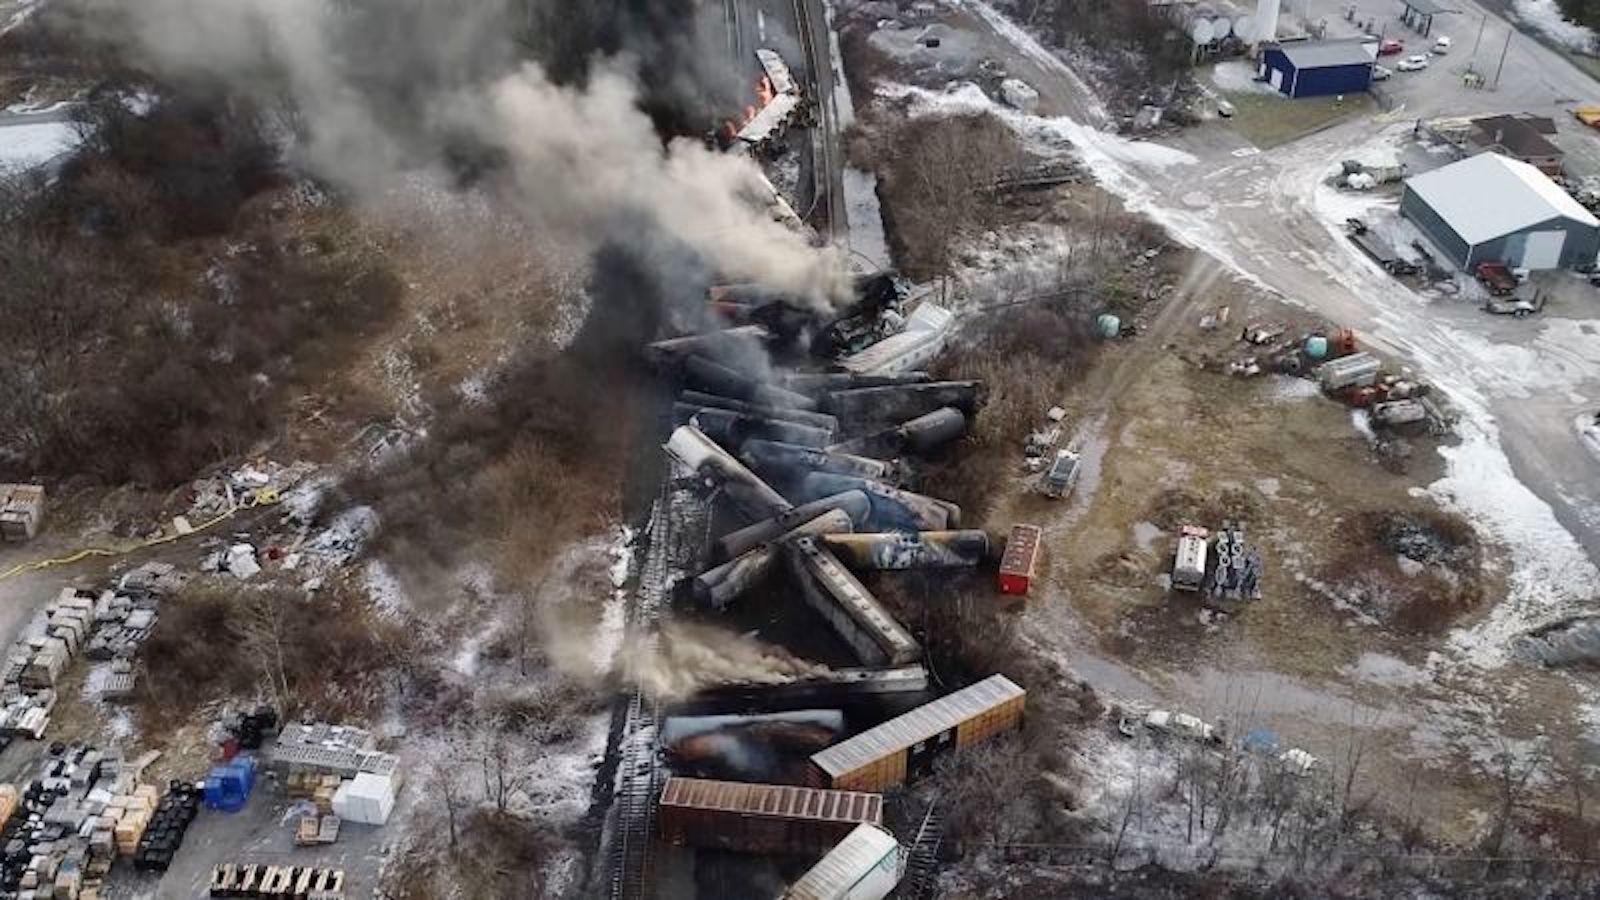 6 Key Points You Need to Know About a Chemical Train Derailment in Ohio